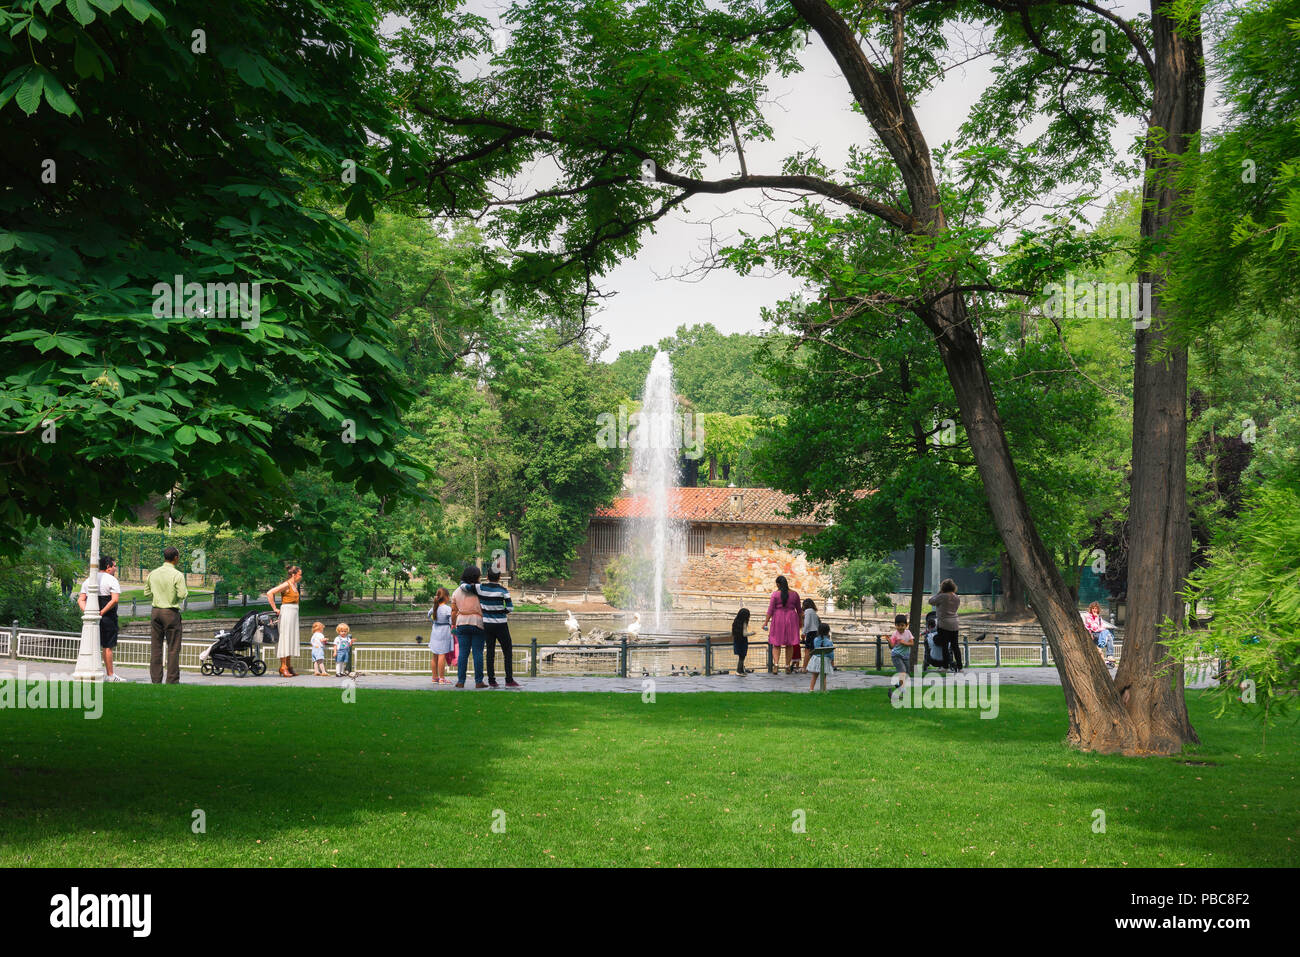 Bilbao park Spain, view of adults and children standing beside a lake in the center of the Parque de Dona Casilda d'Iturriza in Bilbao, Spain. Stock Photo